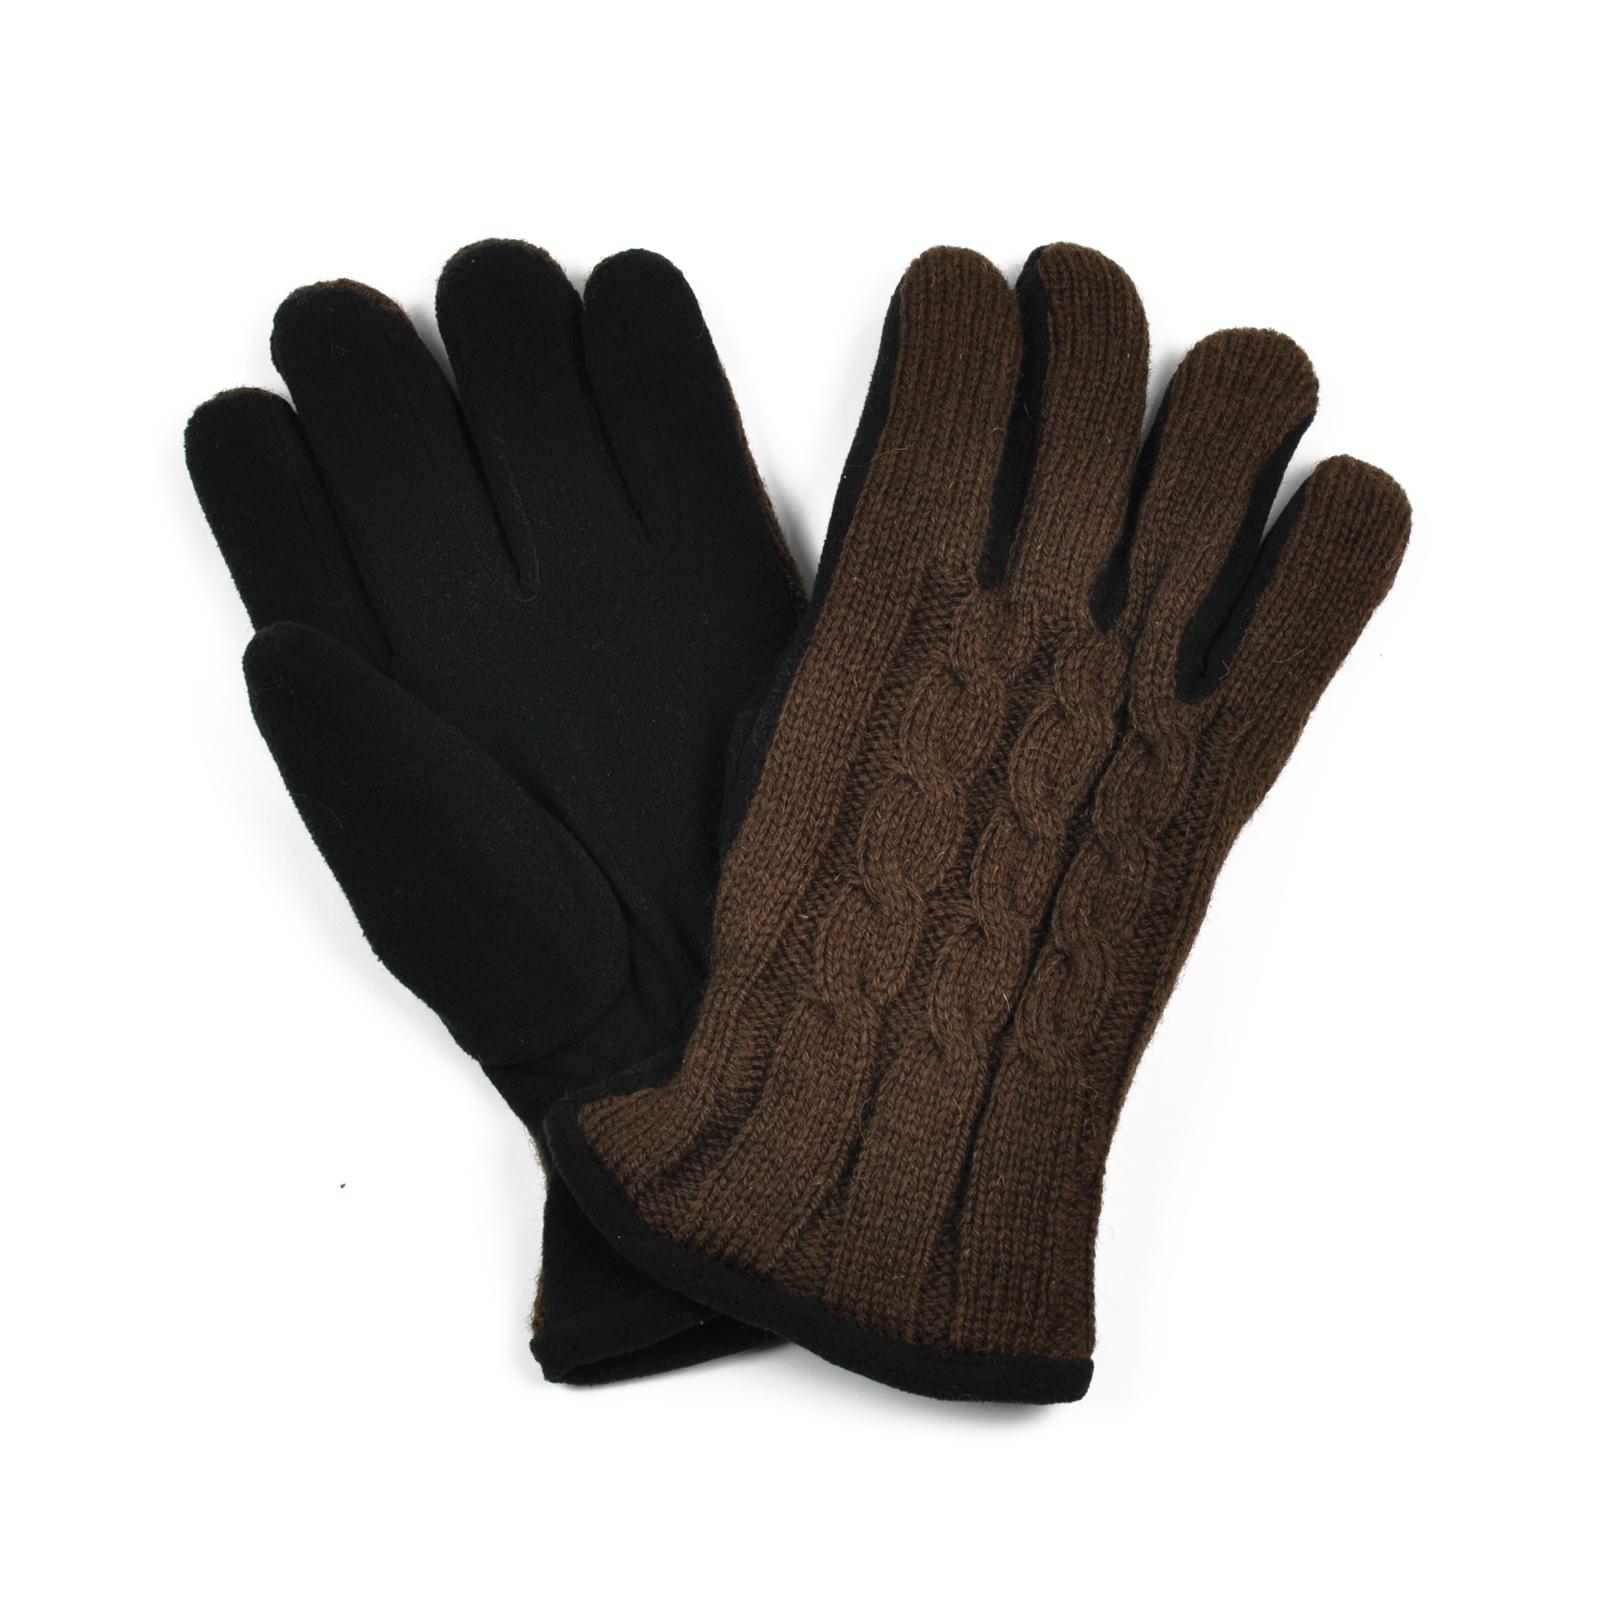 Art Of Polo Woman's Gloves Rk1305-3